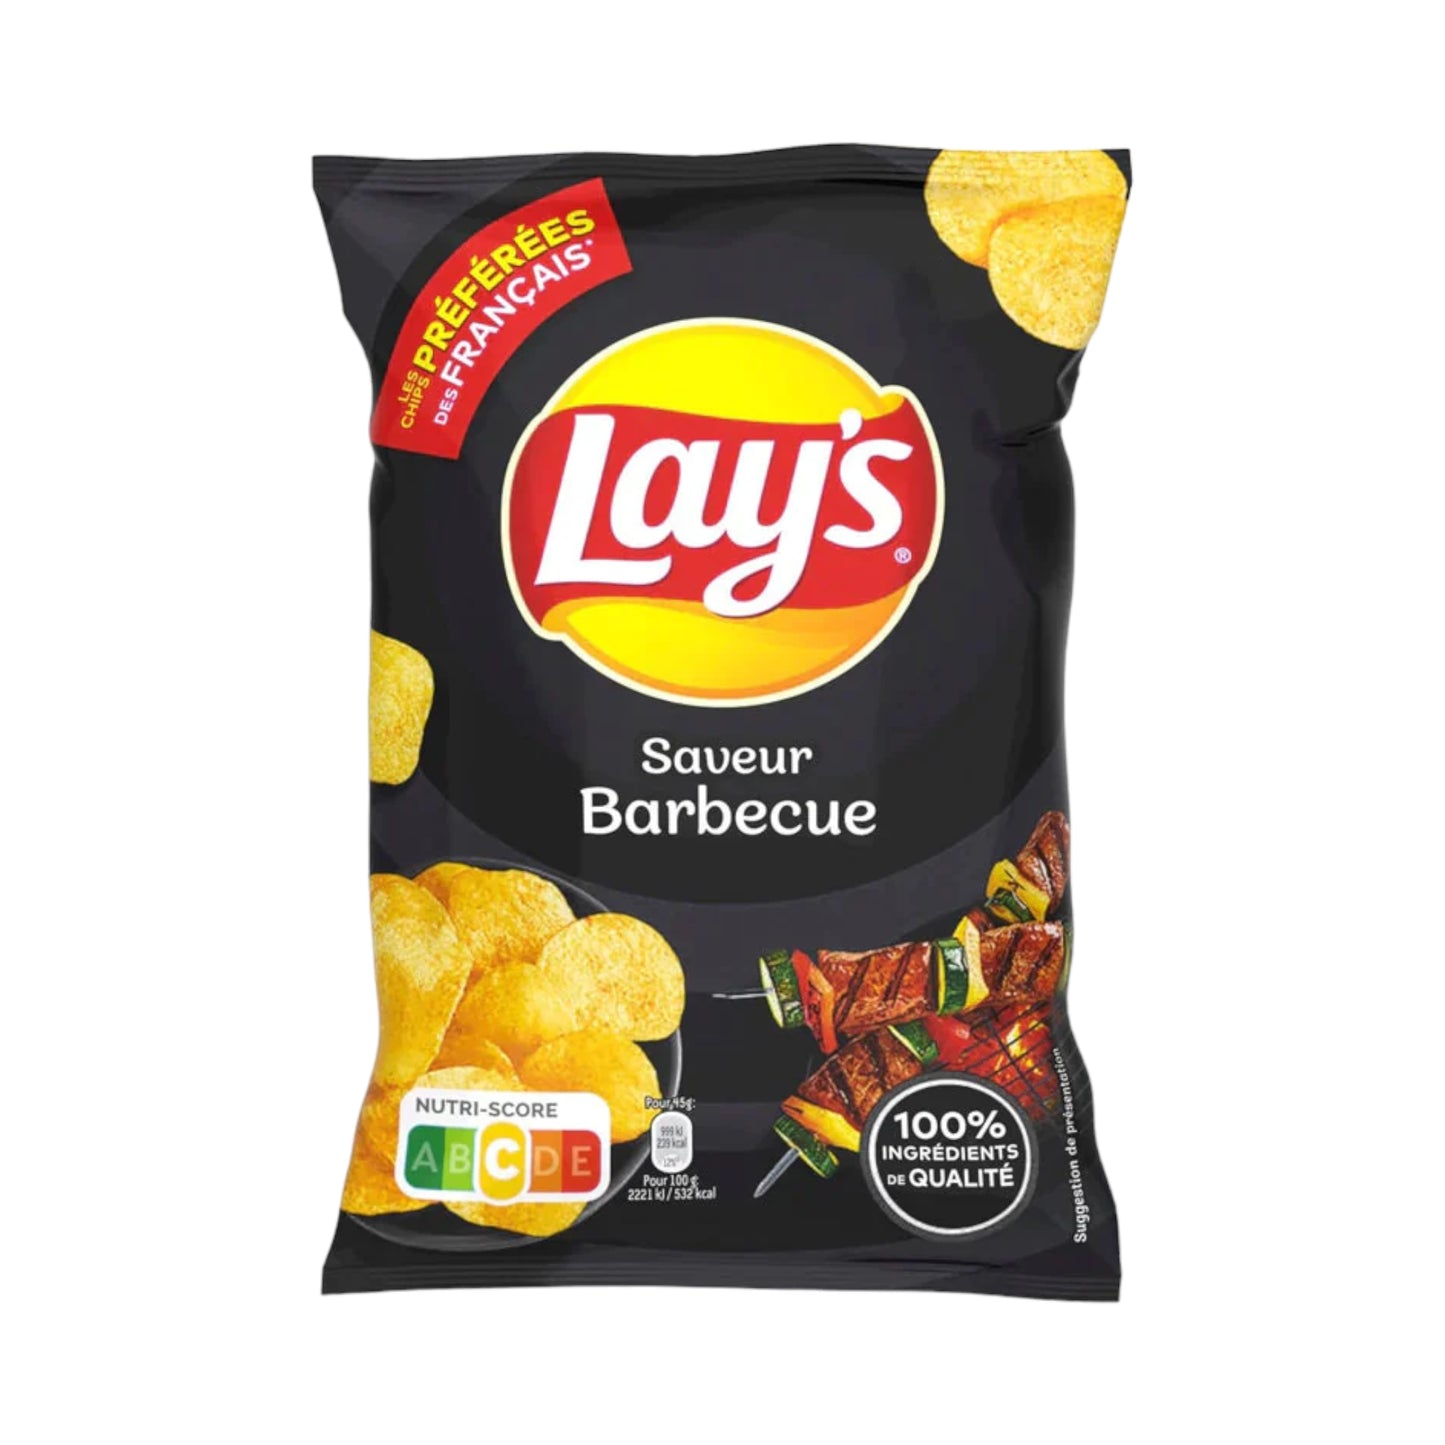 Lays Saveur Barbecue - 45g